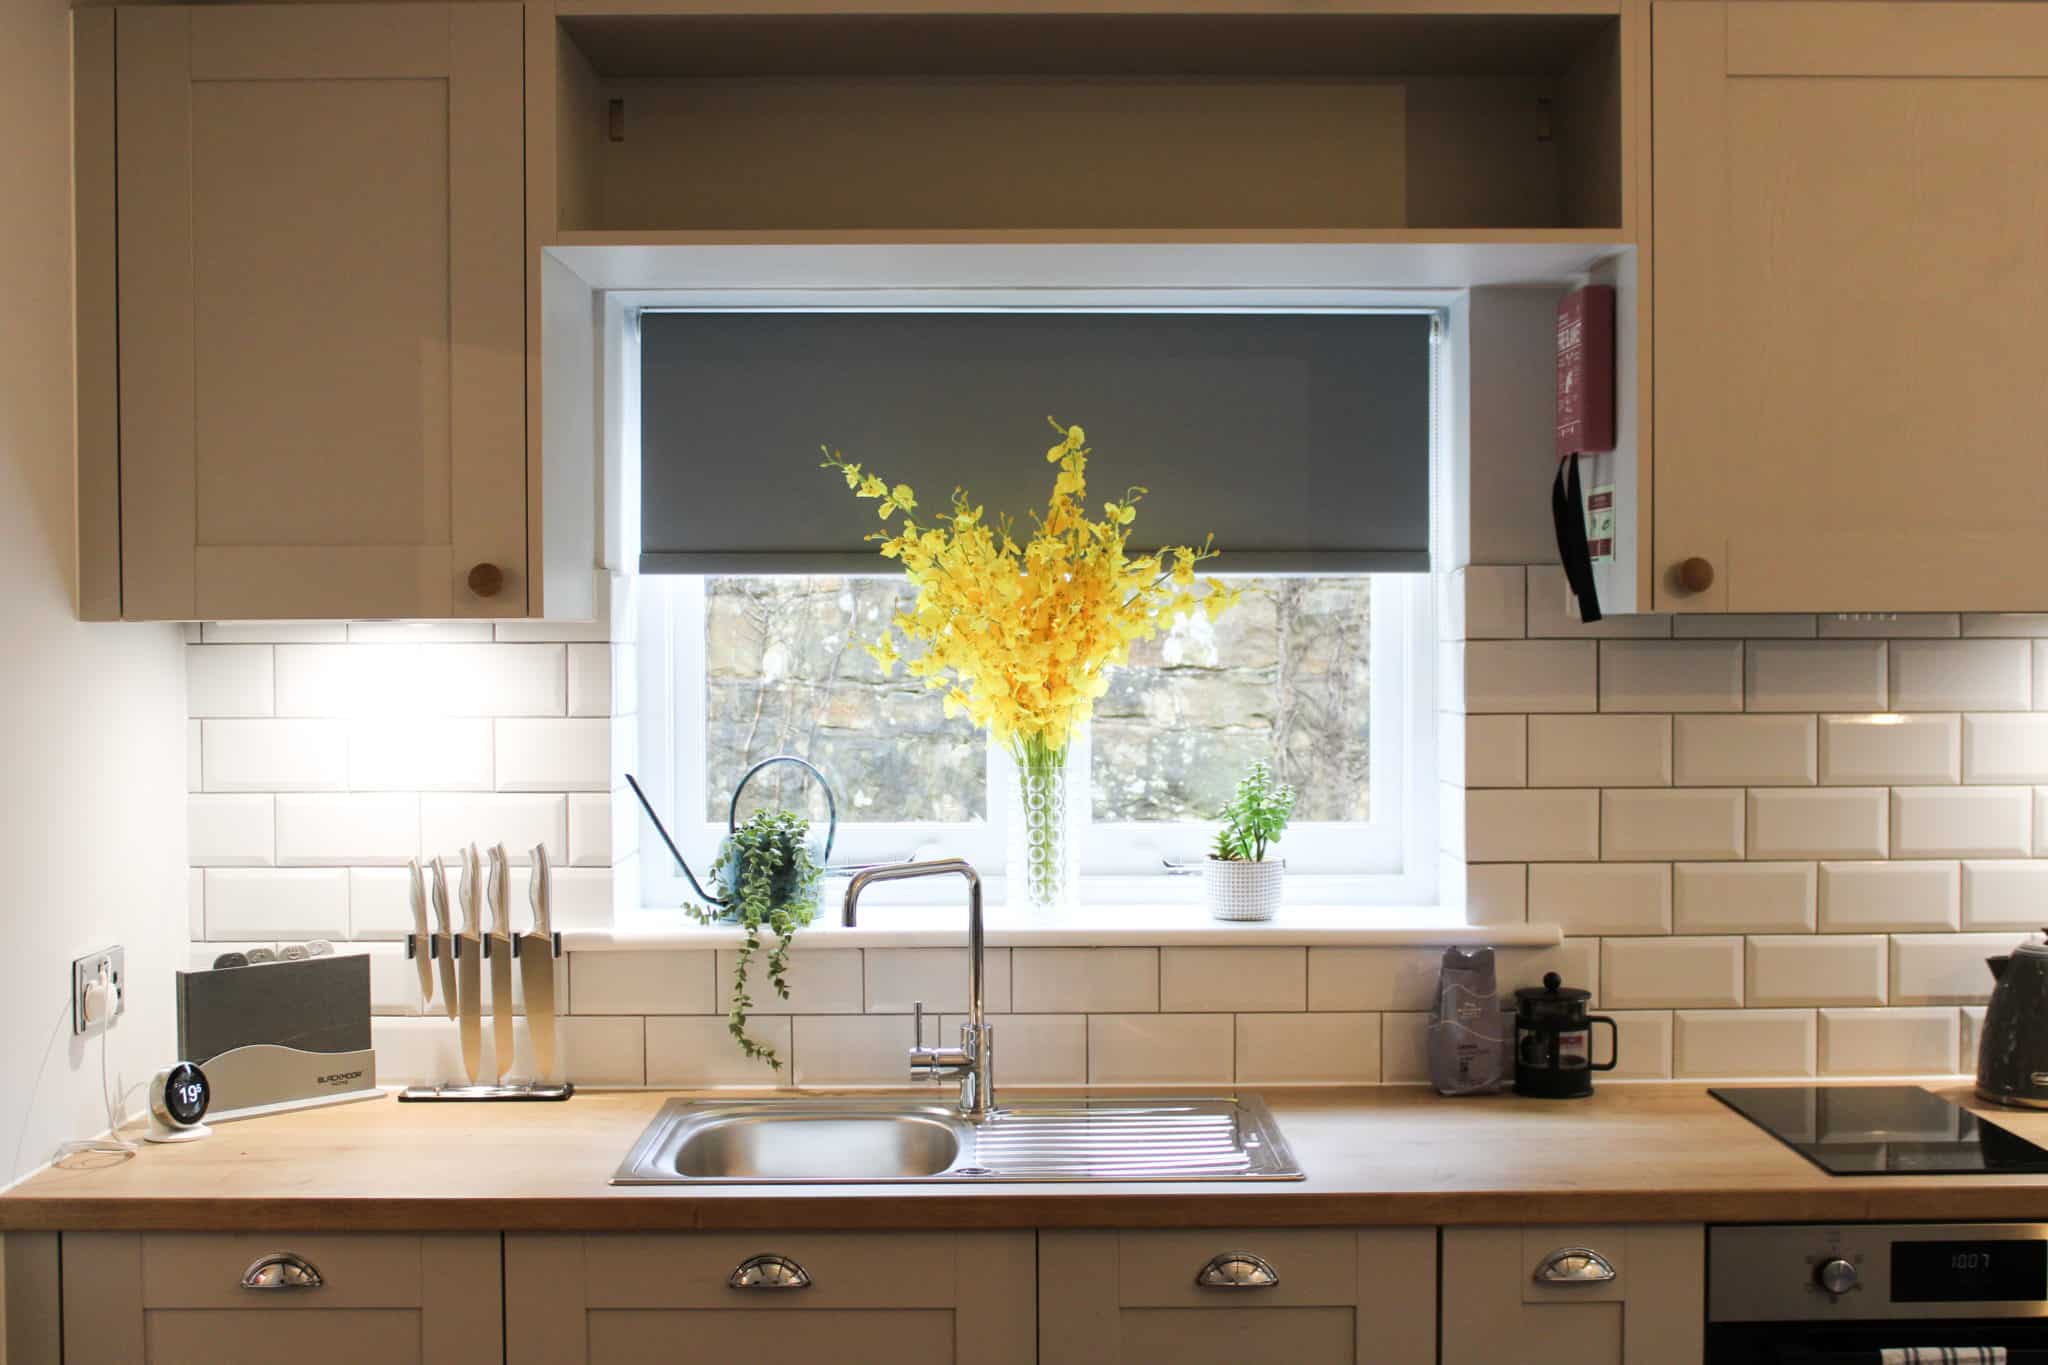 newly installed kitchen in The Garden Cottages with a vase of yellow flowers